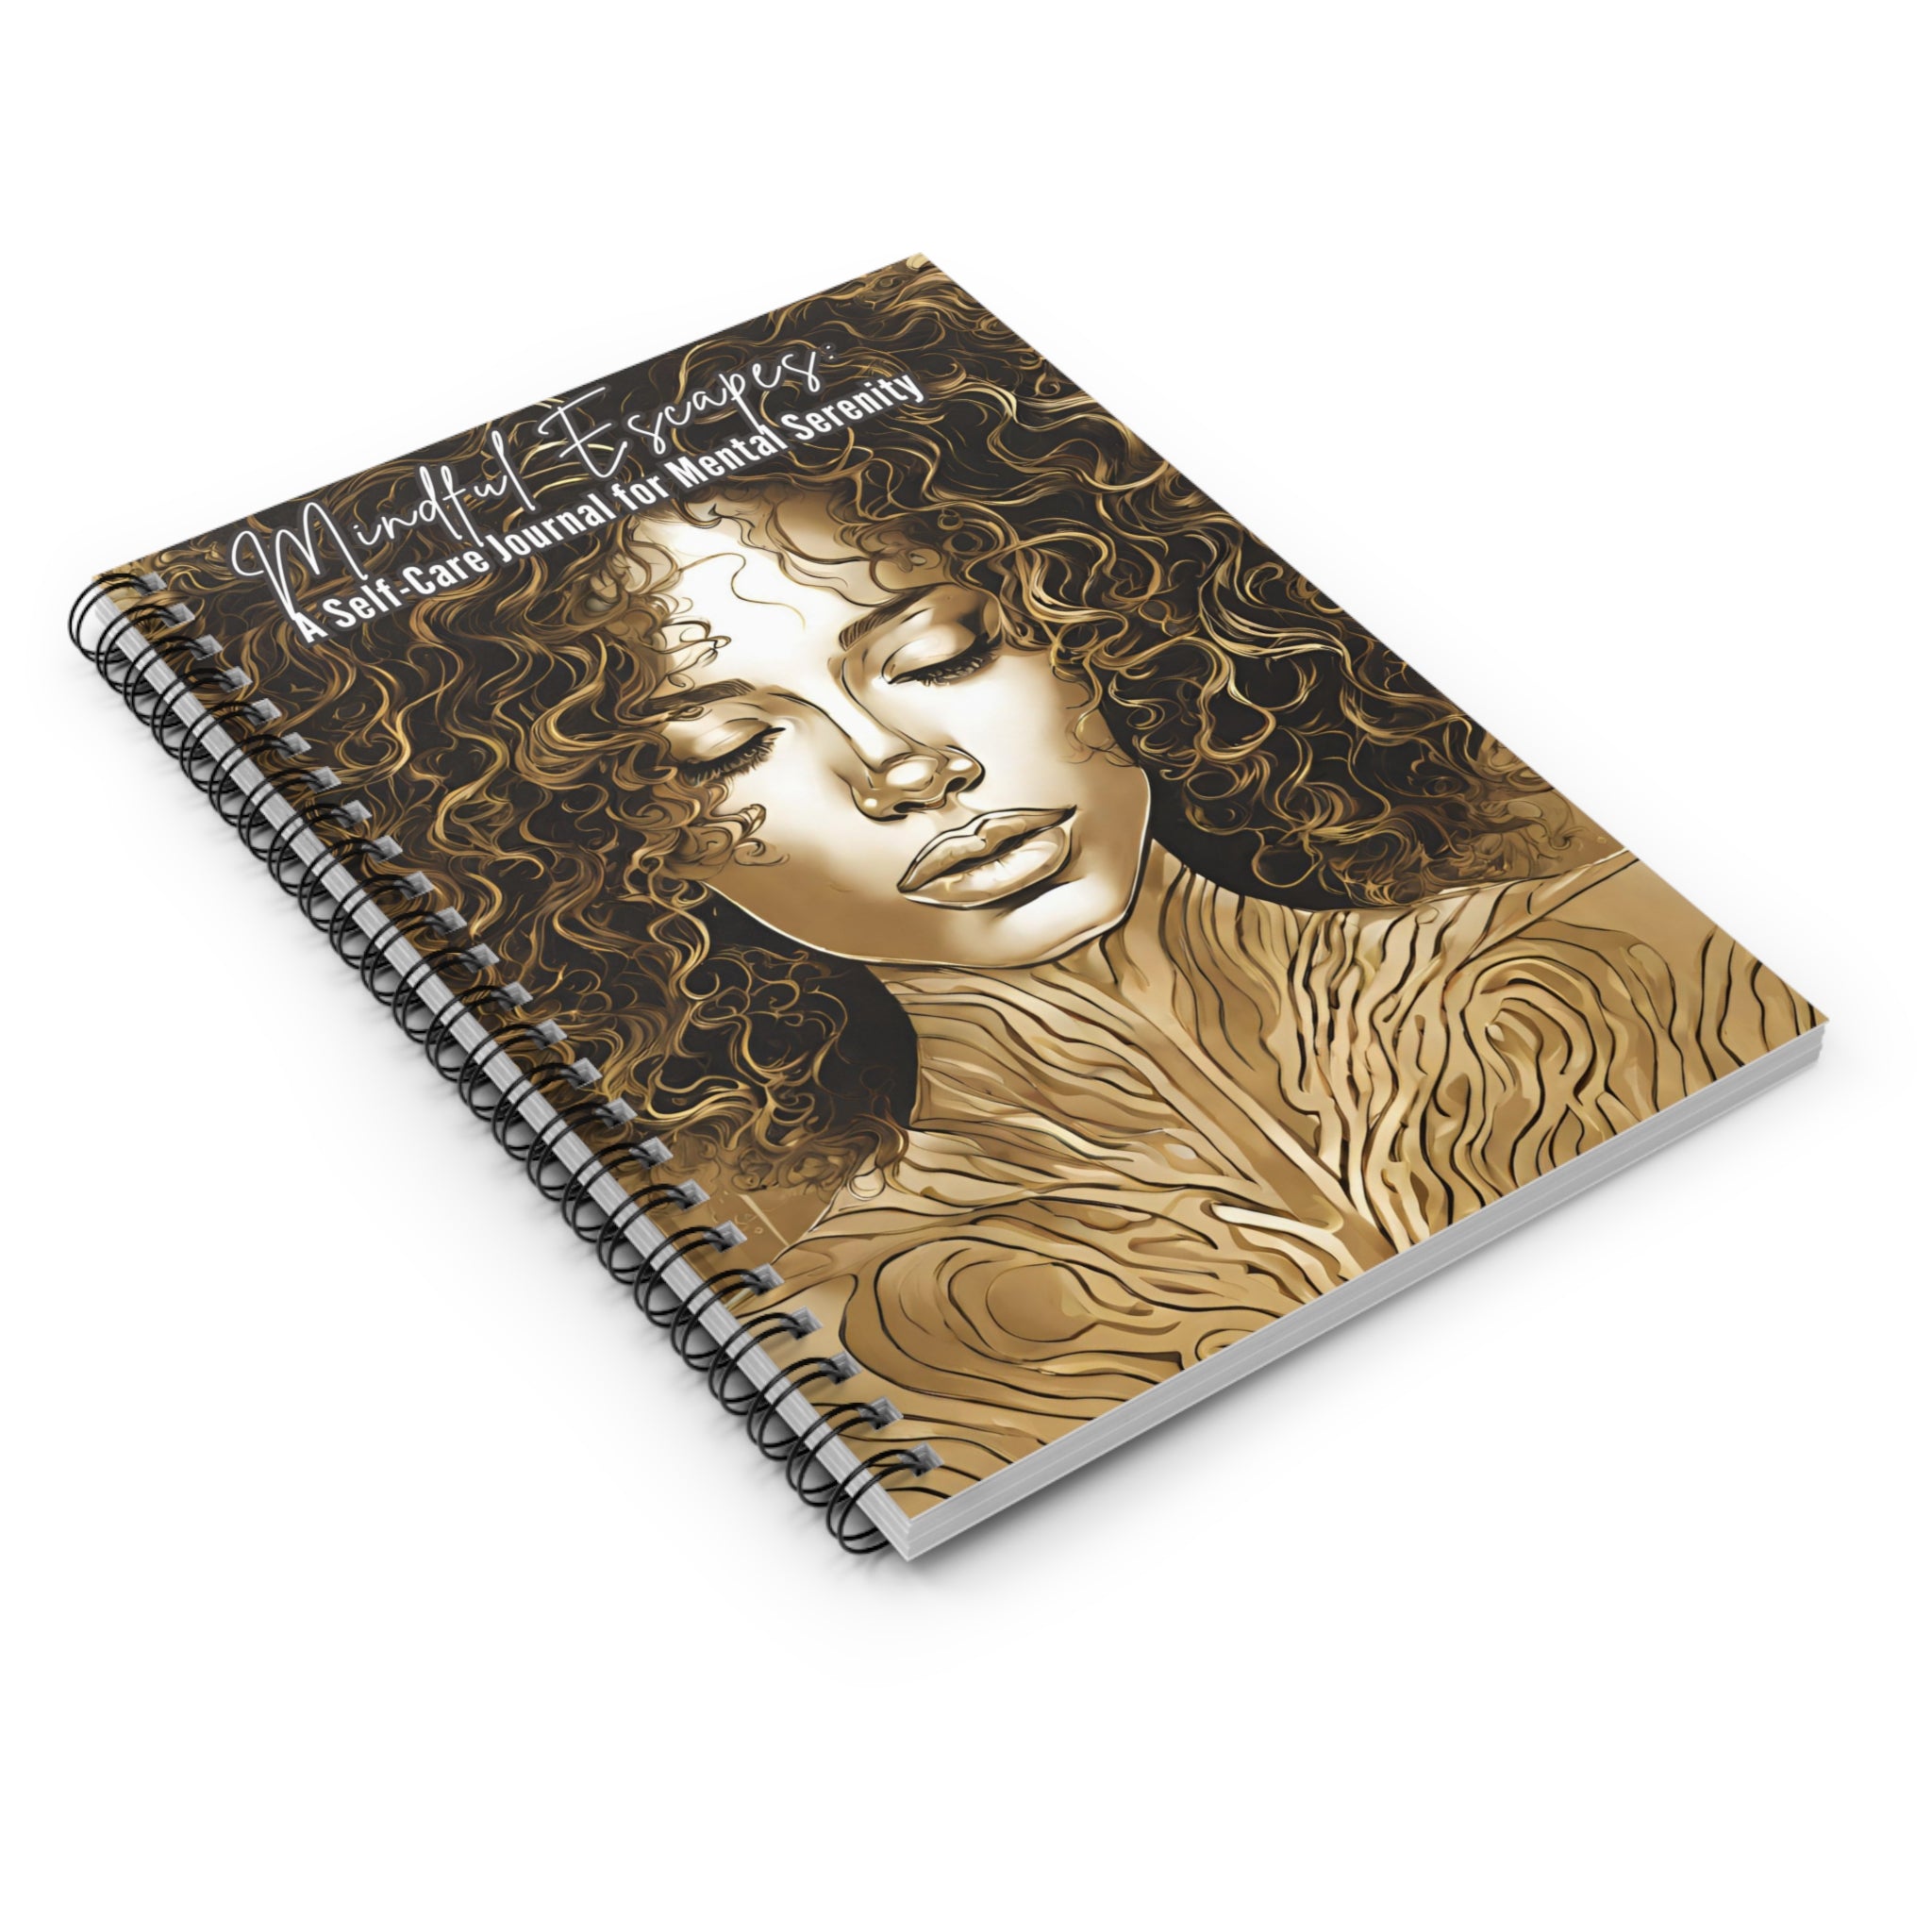 Self Care Spiral Notebook - Ruled Line